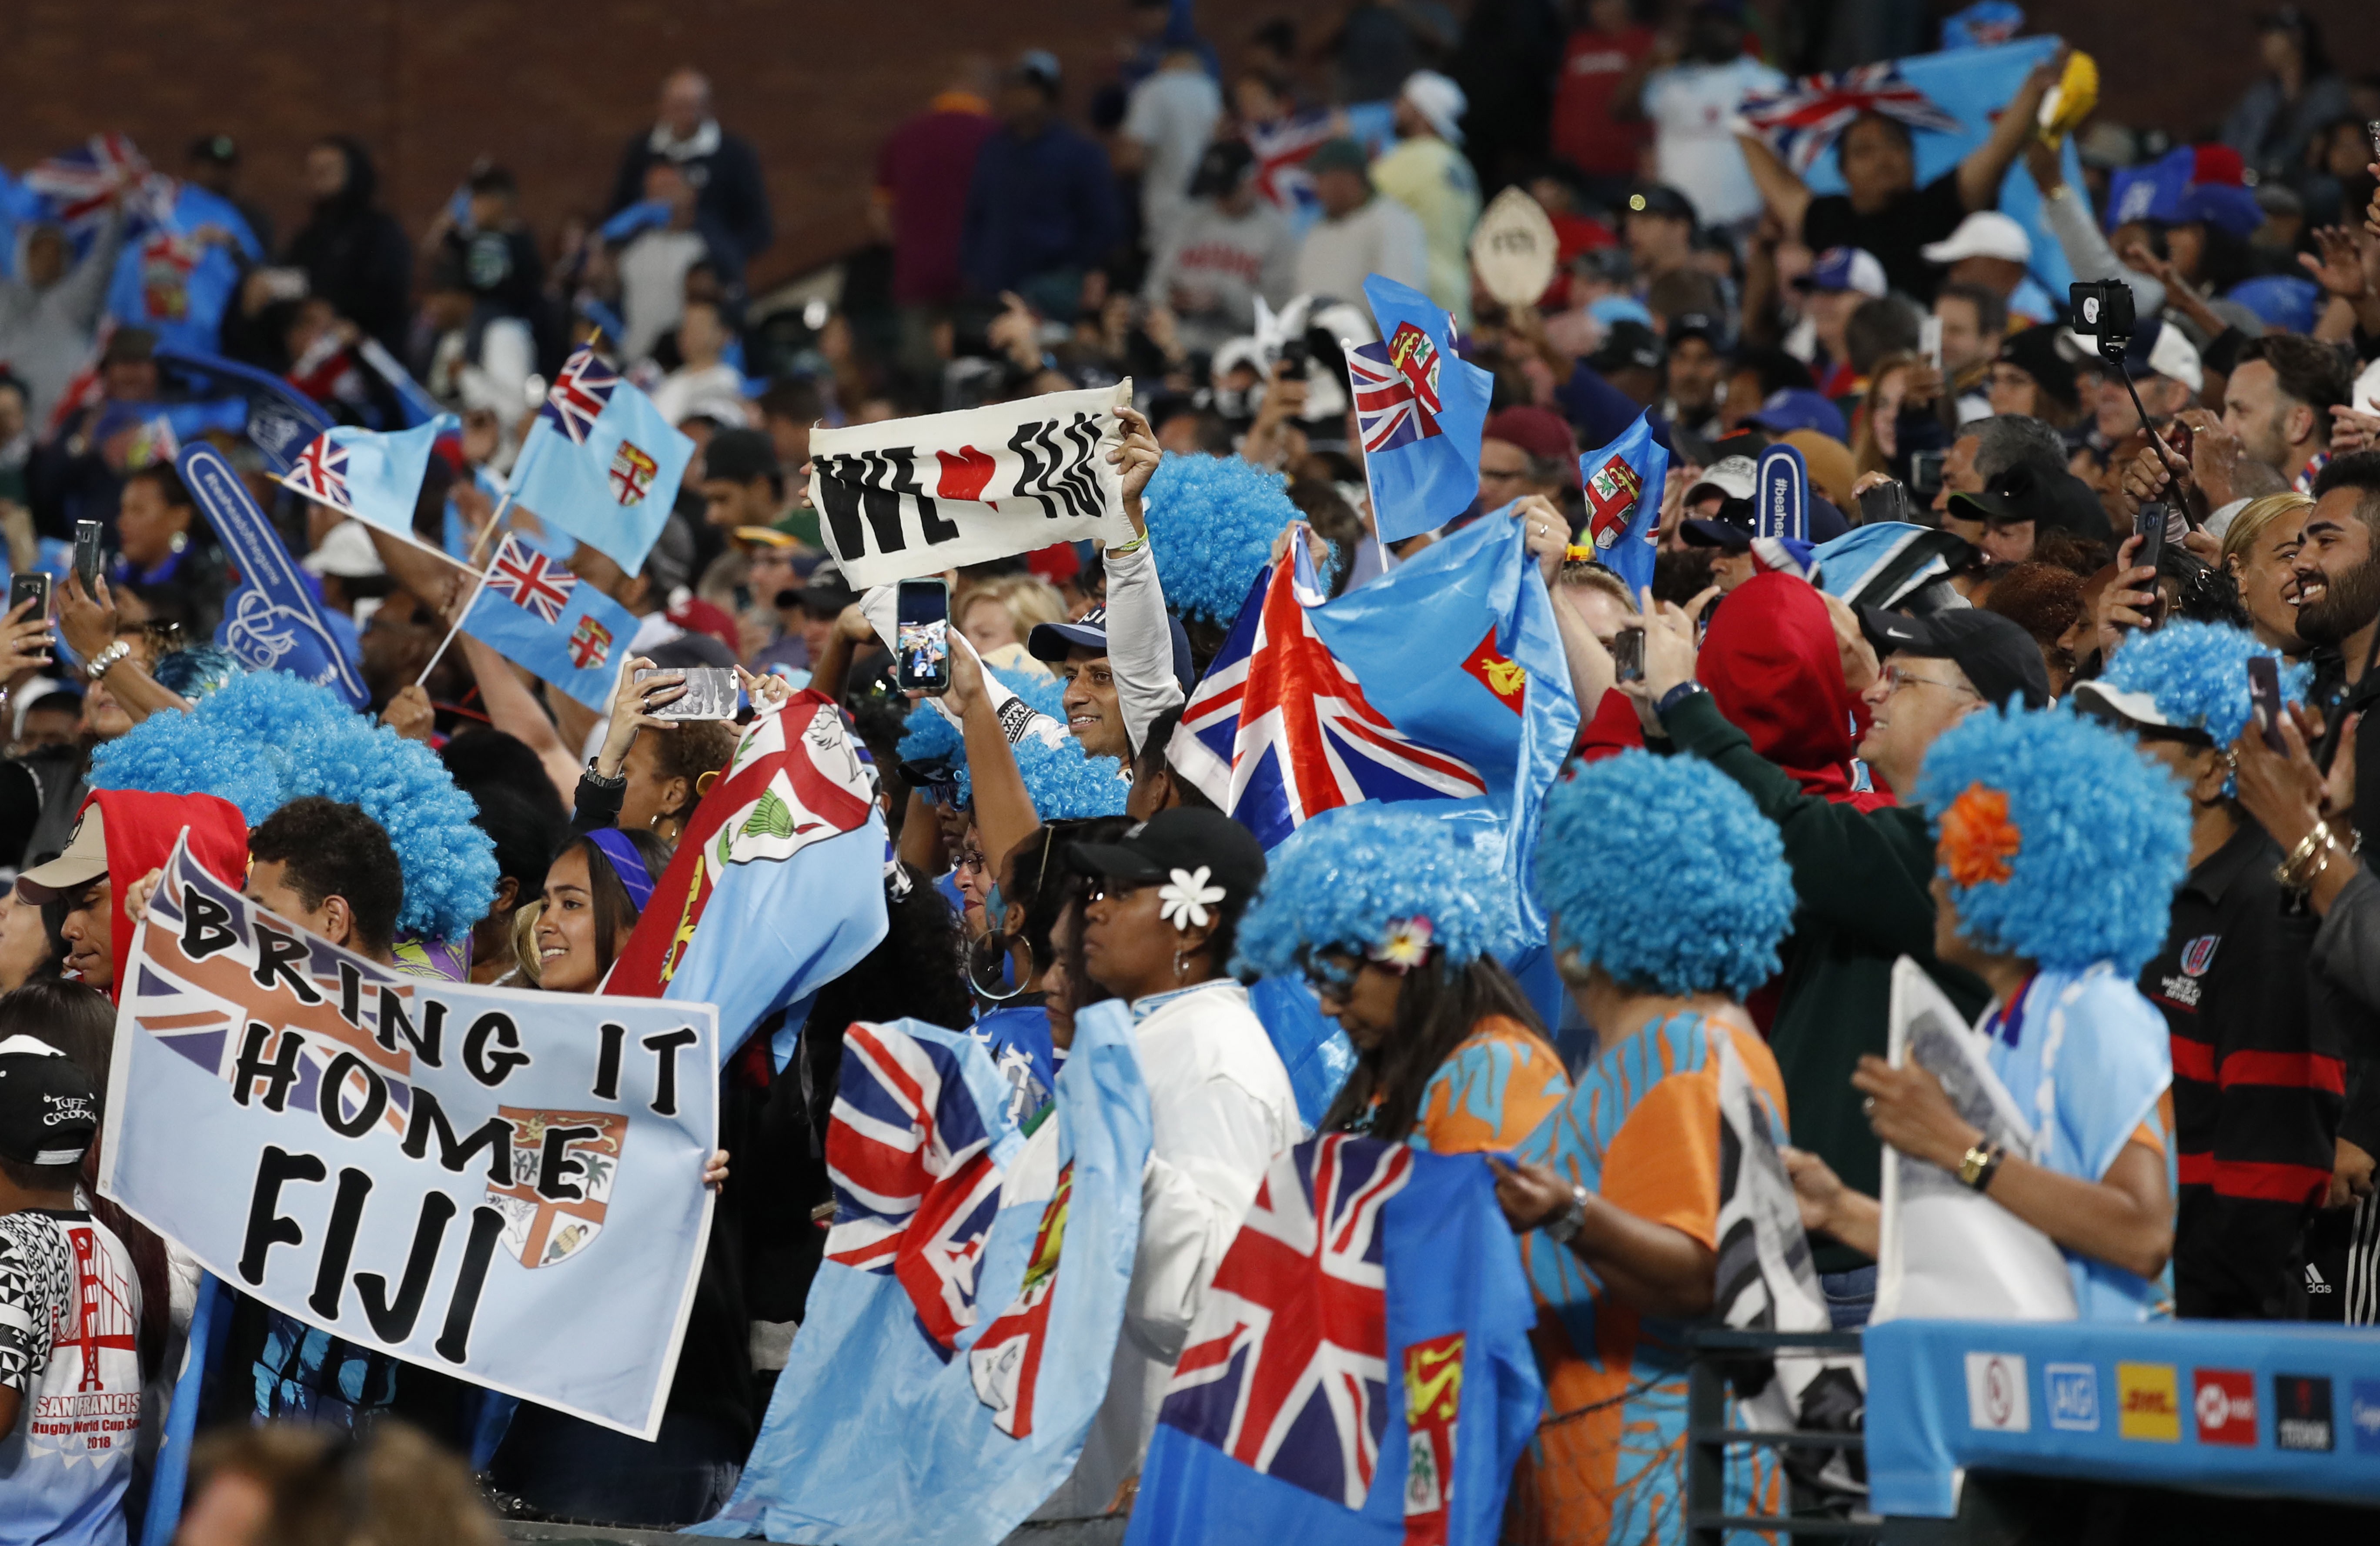 Fijian fans at the Rugby World Cup Sevens in San Francisco. Photo: EPA